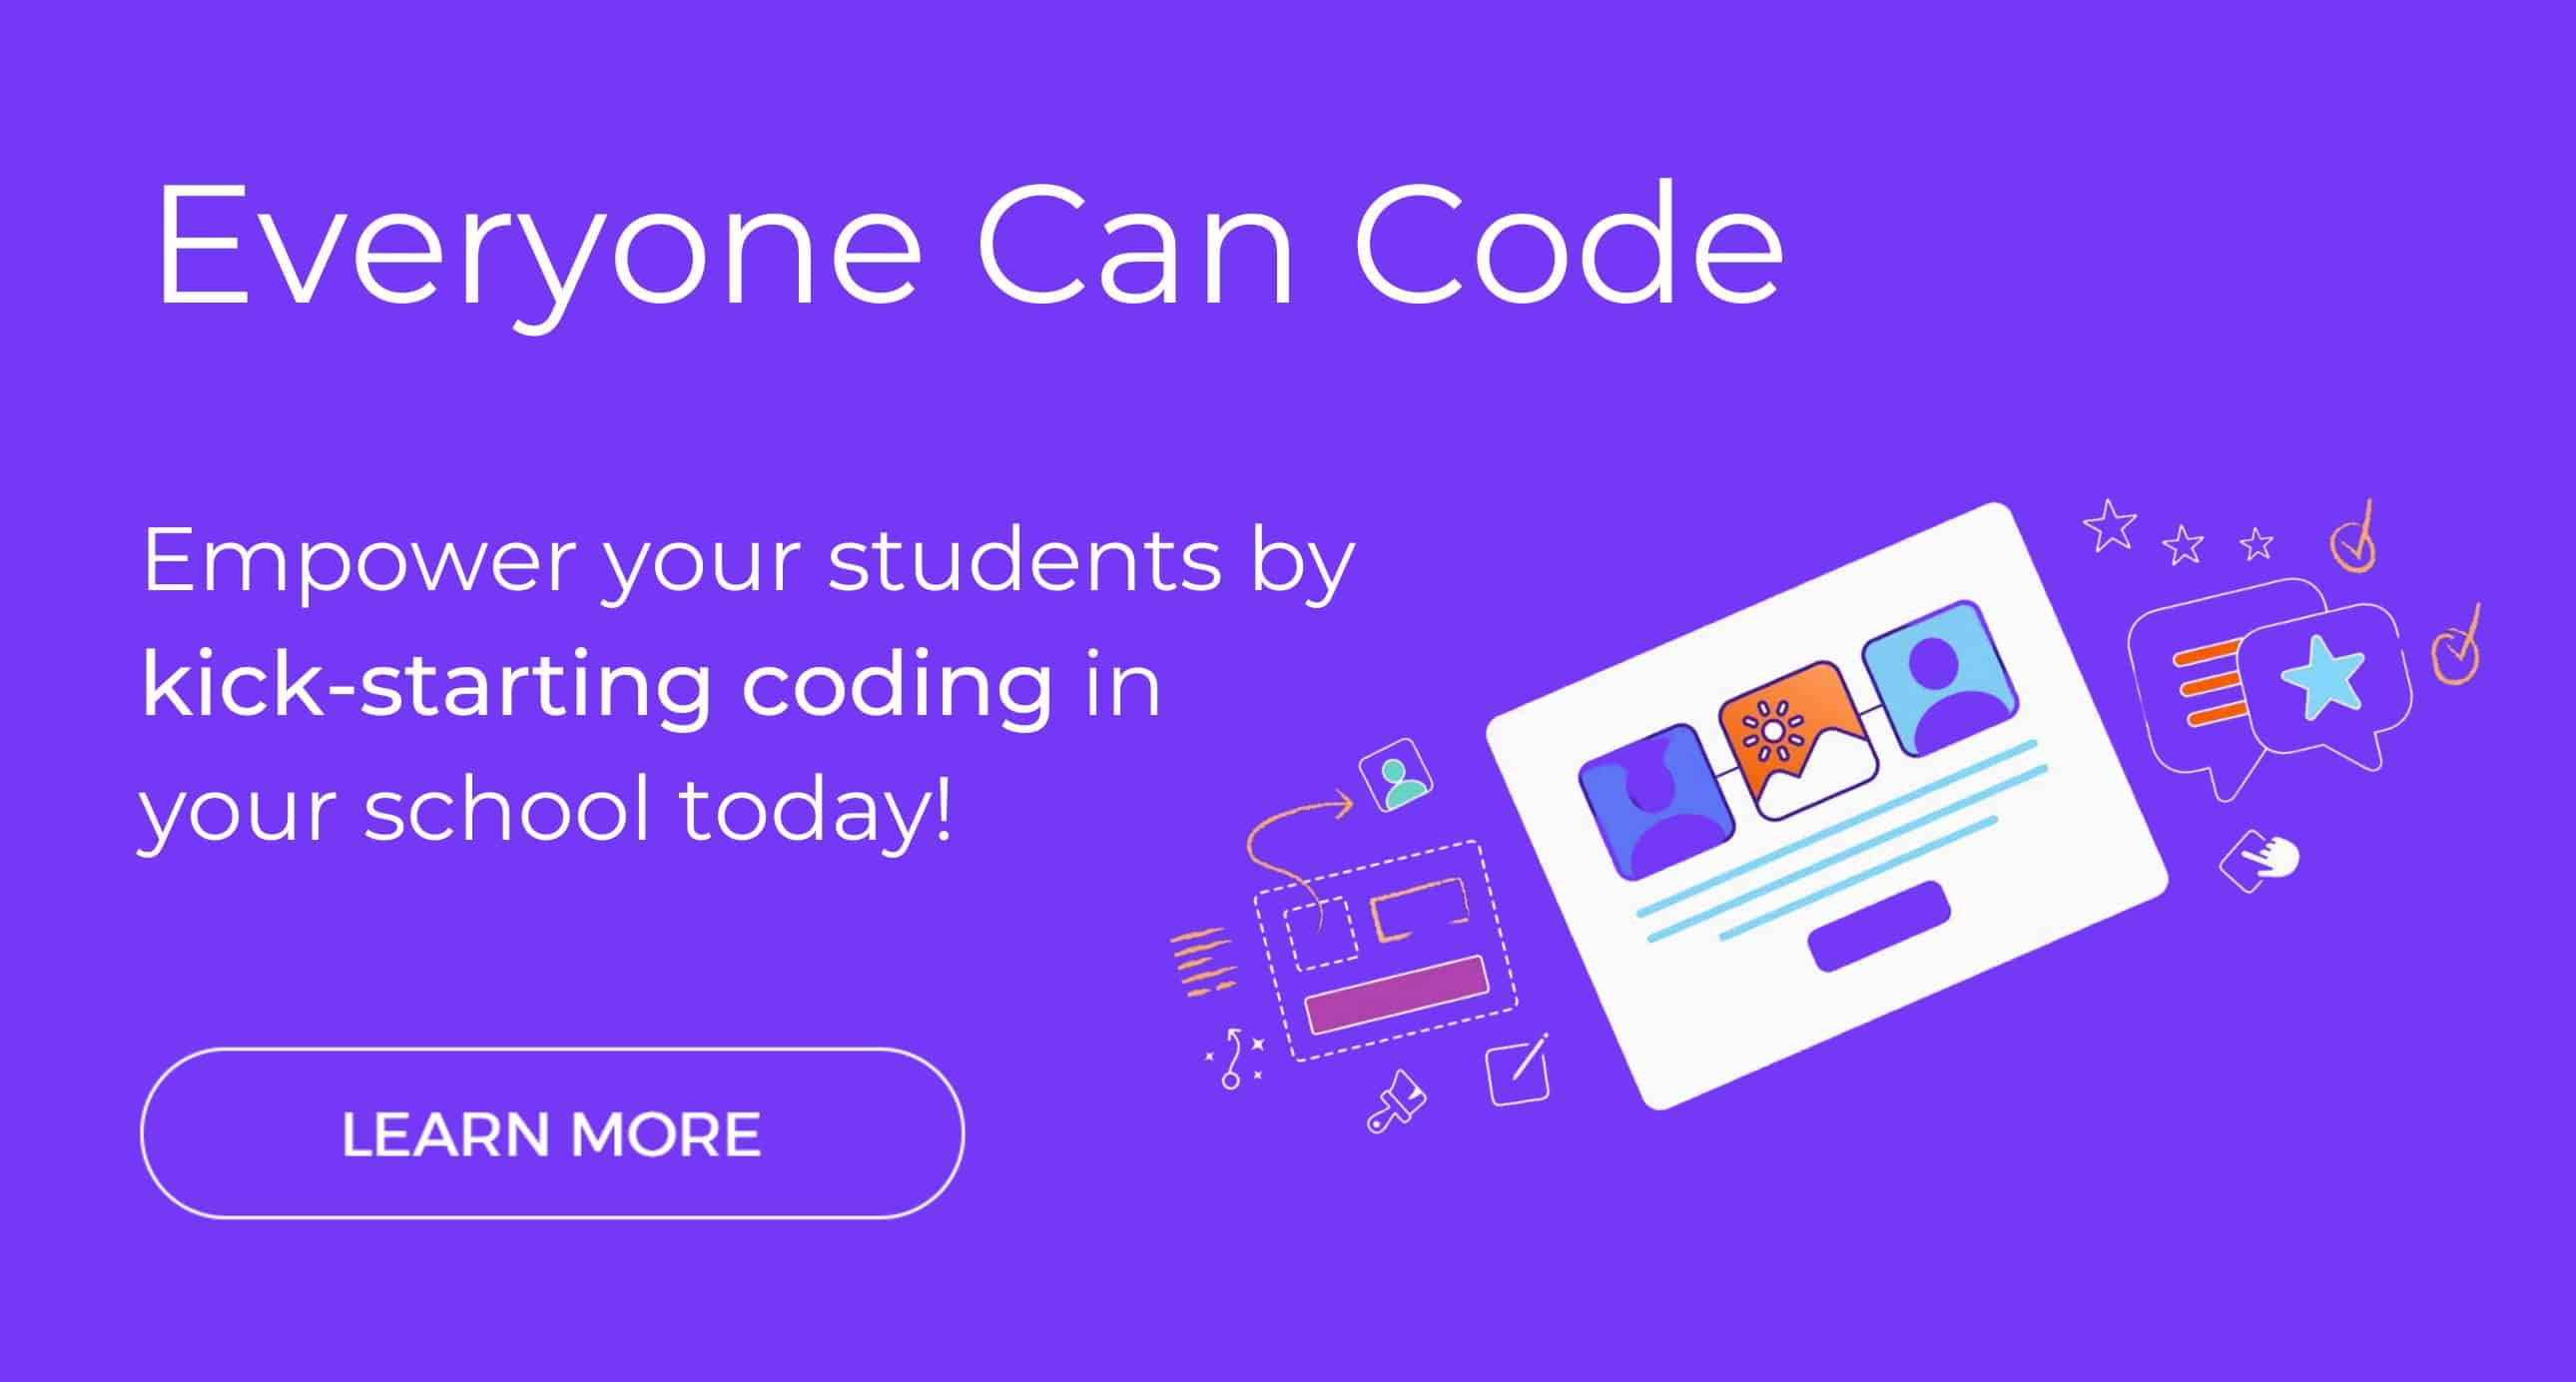 Everyone Can Code. Empower your students by kick-starting coding in your school today! Click to learn more.